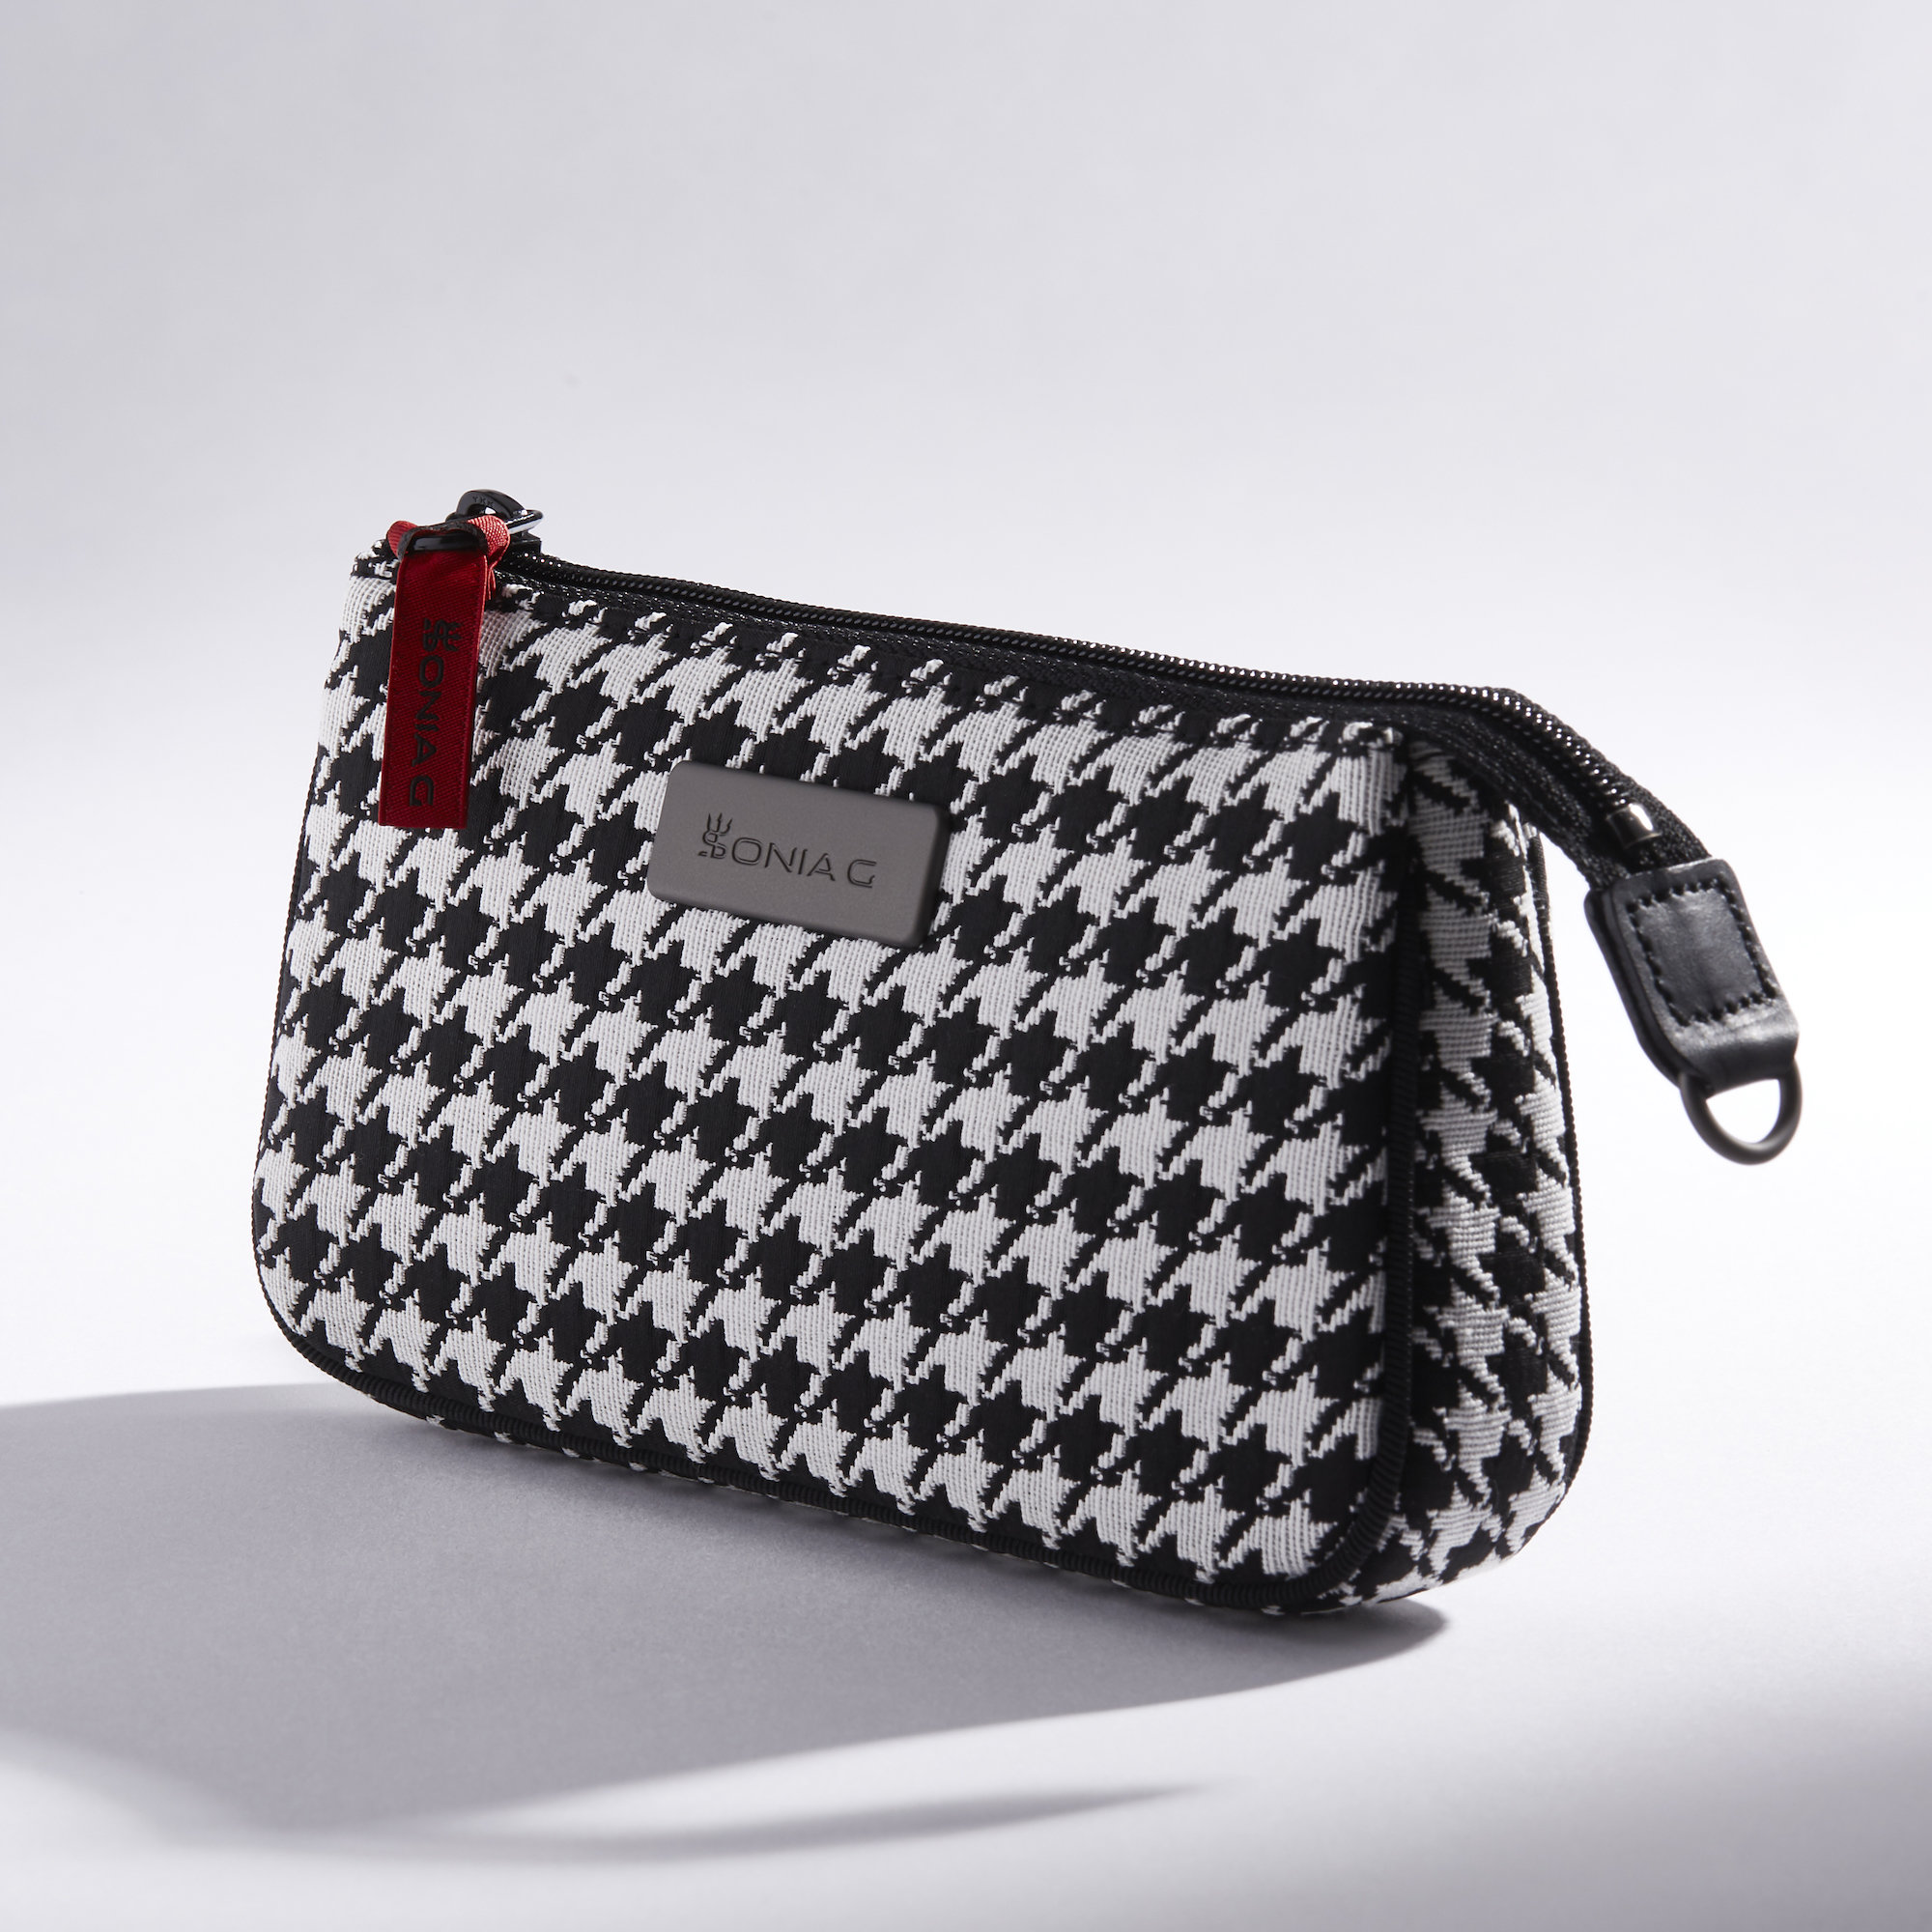 Alternate product image for The Houndstooth Mini Zipped Pouch shown with the description.